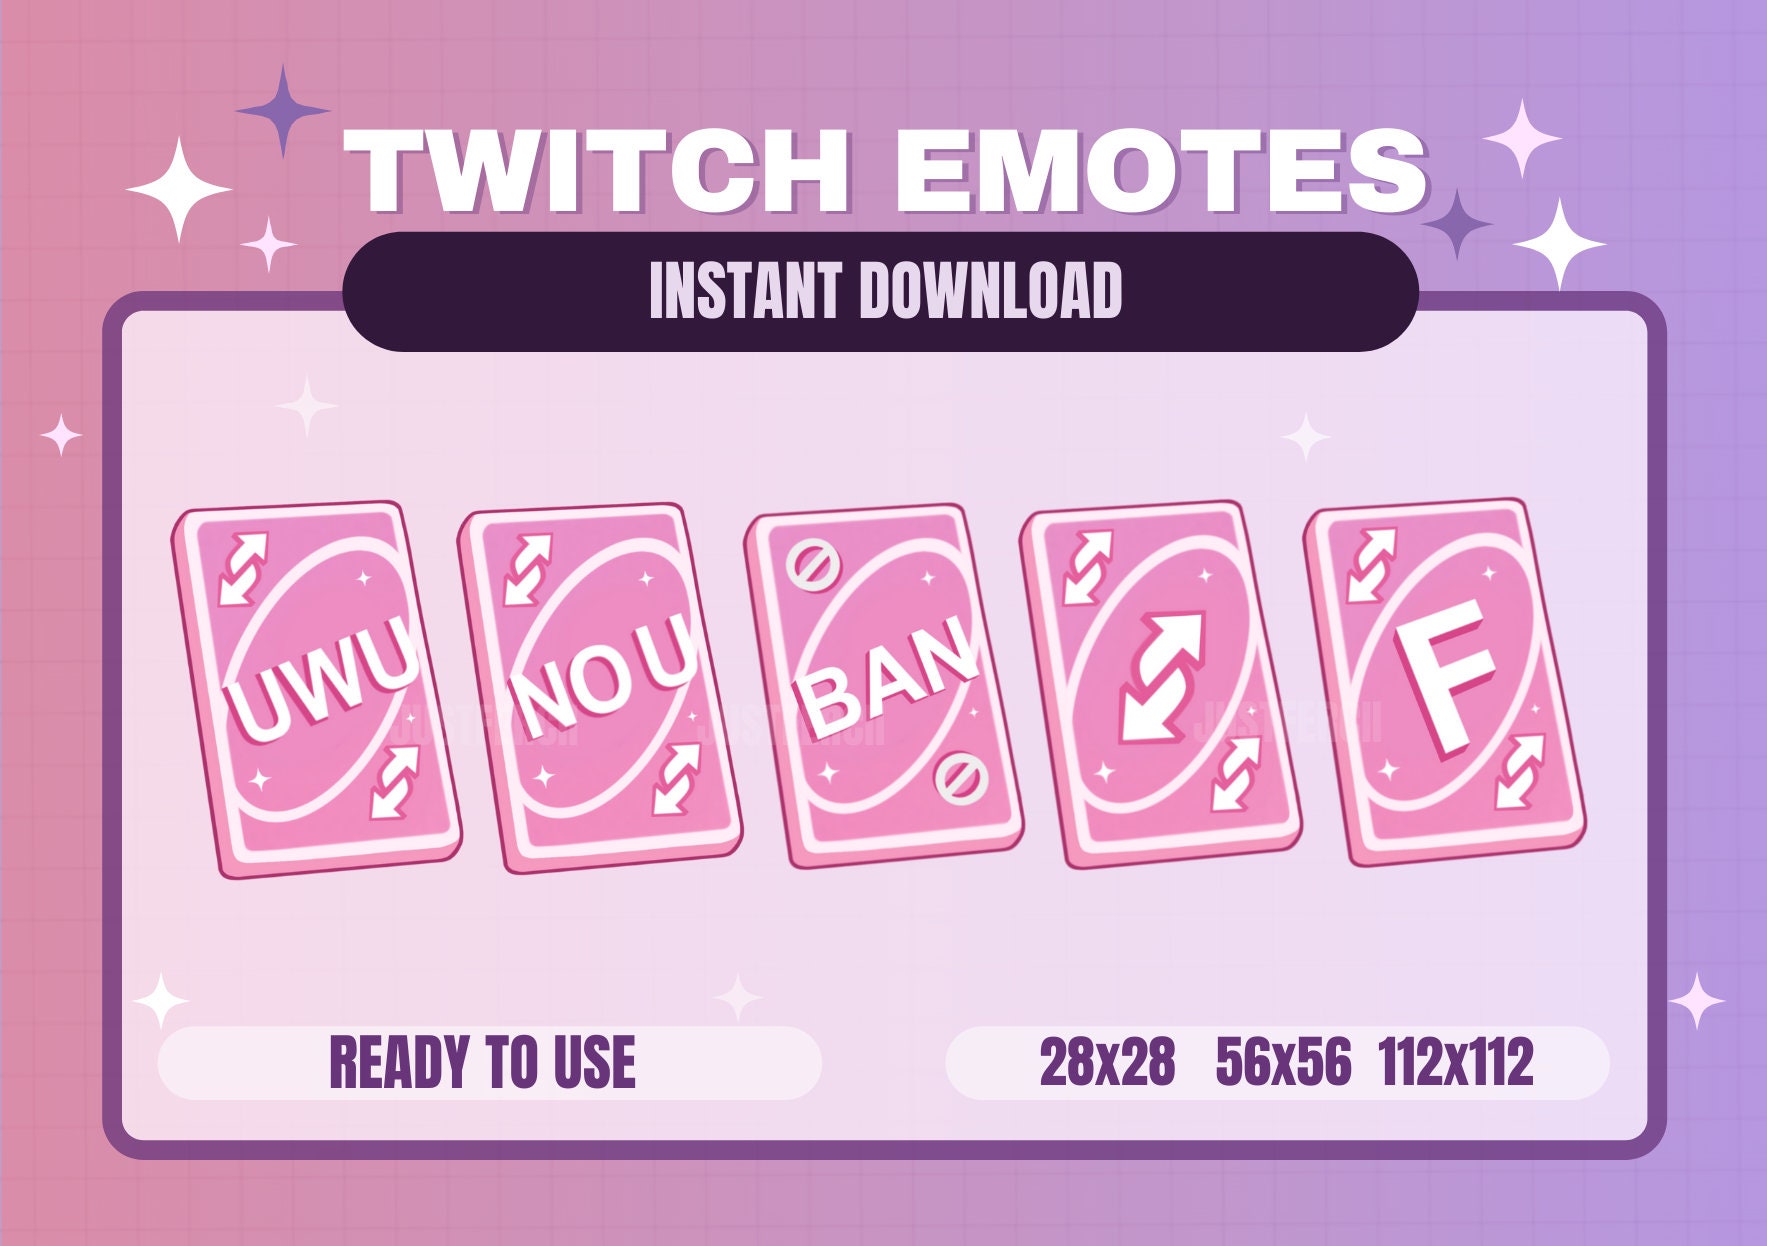 1st Special Set of UNO Reverse Card Emojis for Streaming 